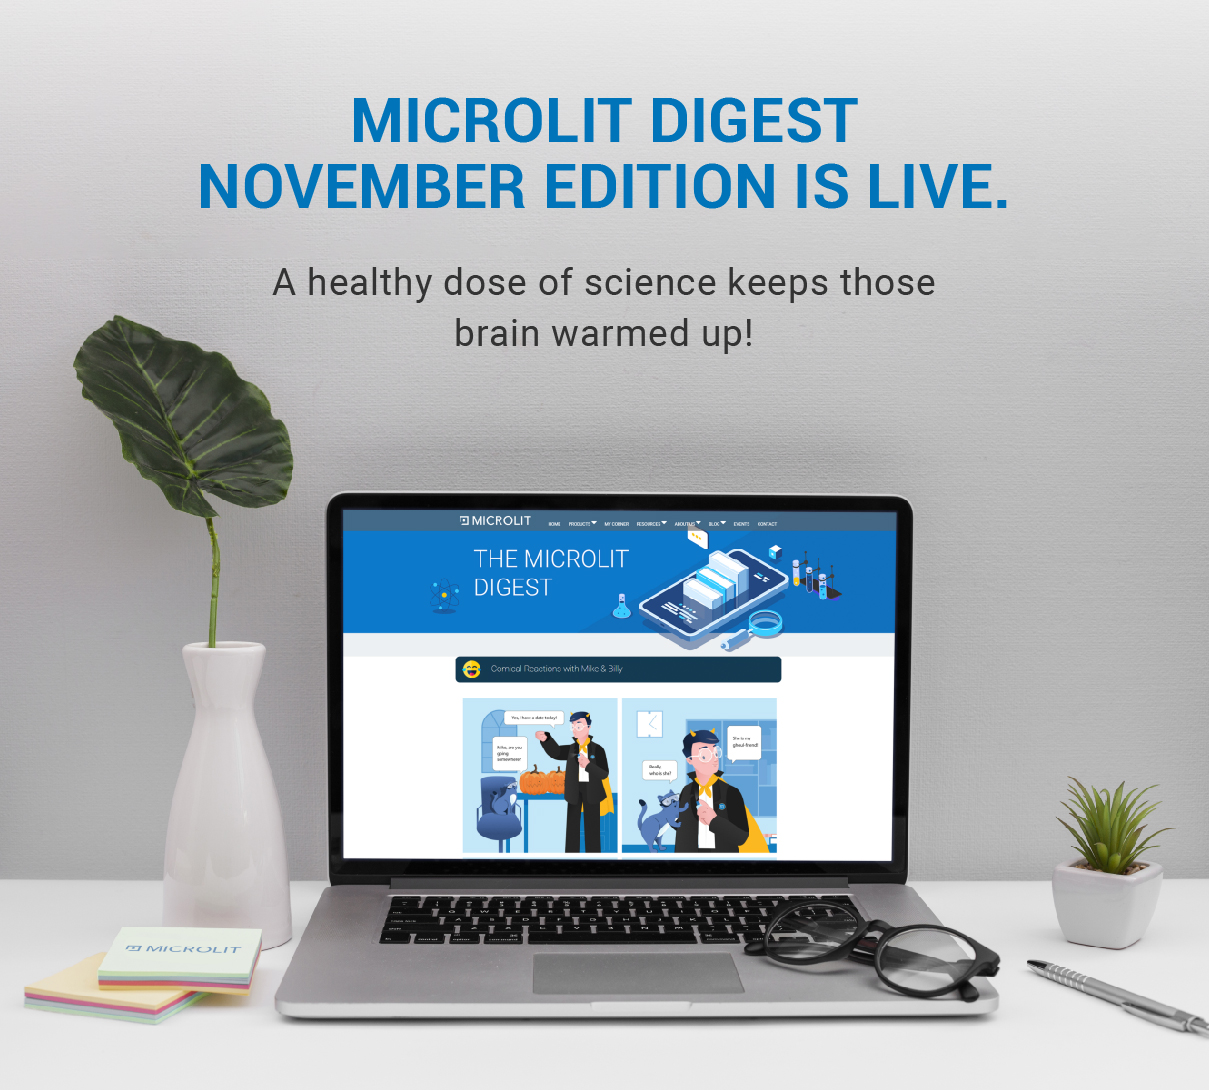 Make way for the Microlit Digest “November” Edition!